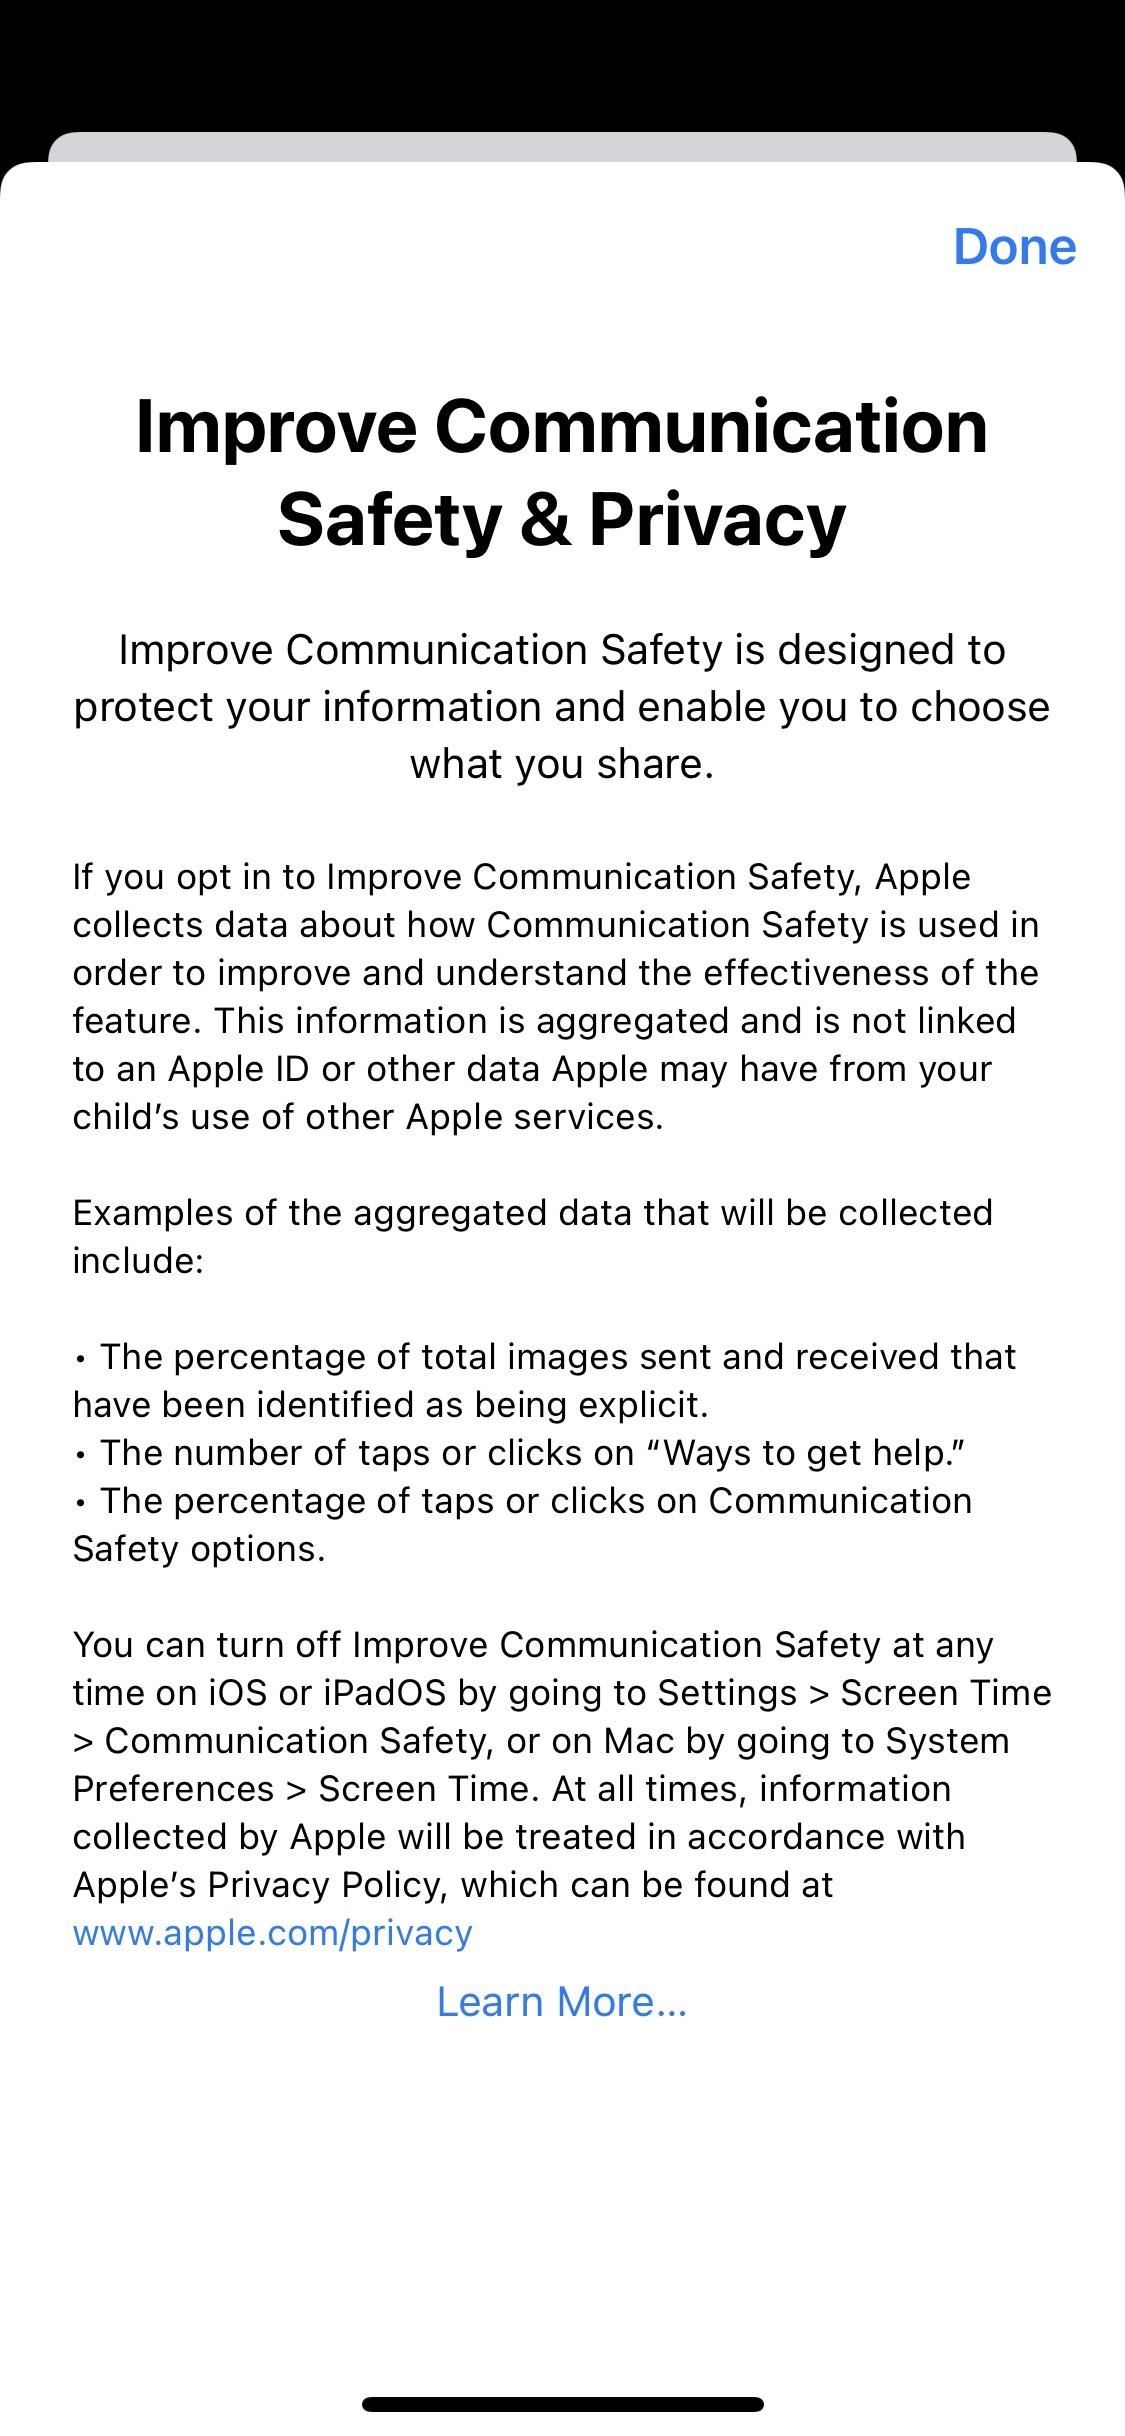 7 Things You Need to Know About iOS 15.6 for iPhone, Which Includes Over 35 Security Patches